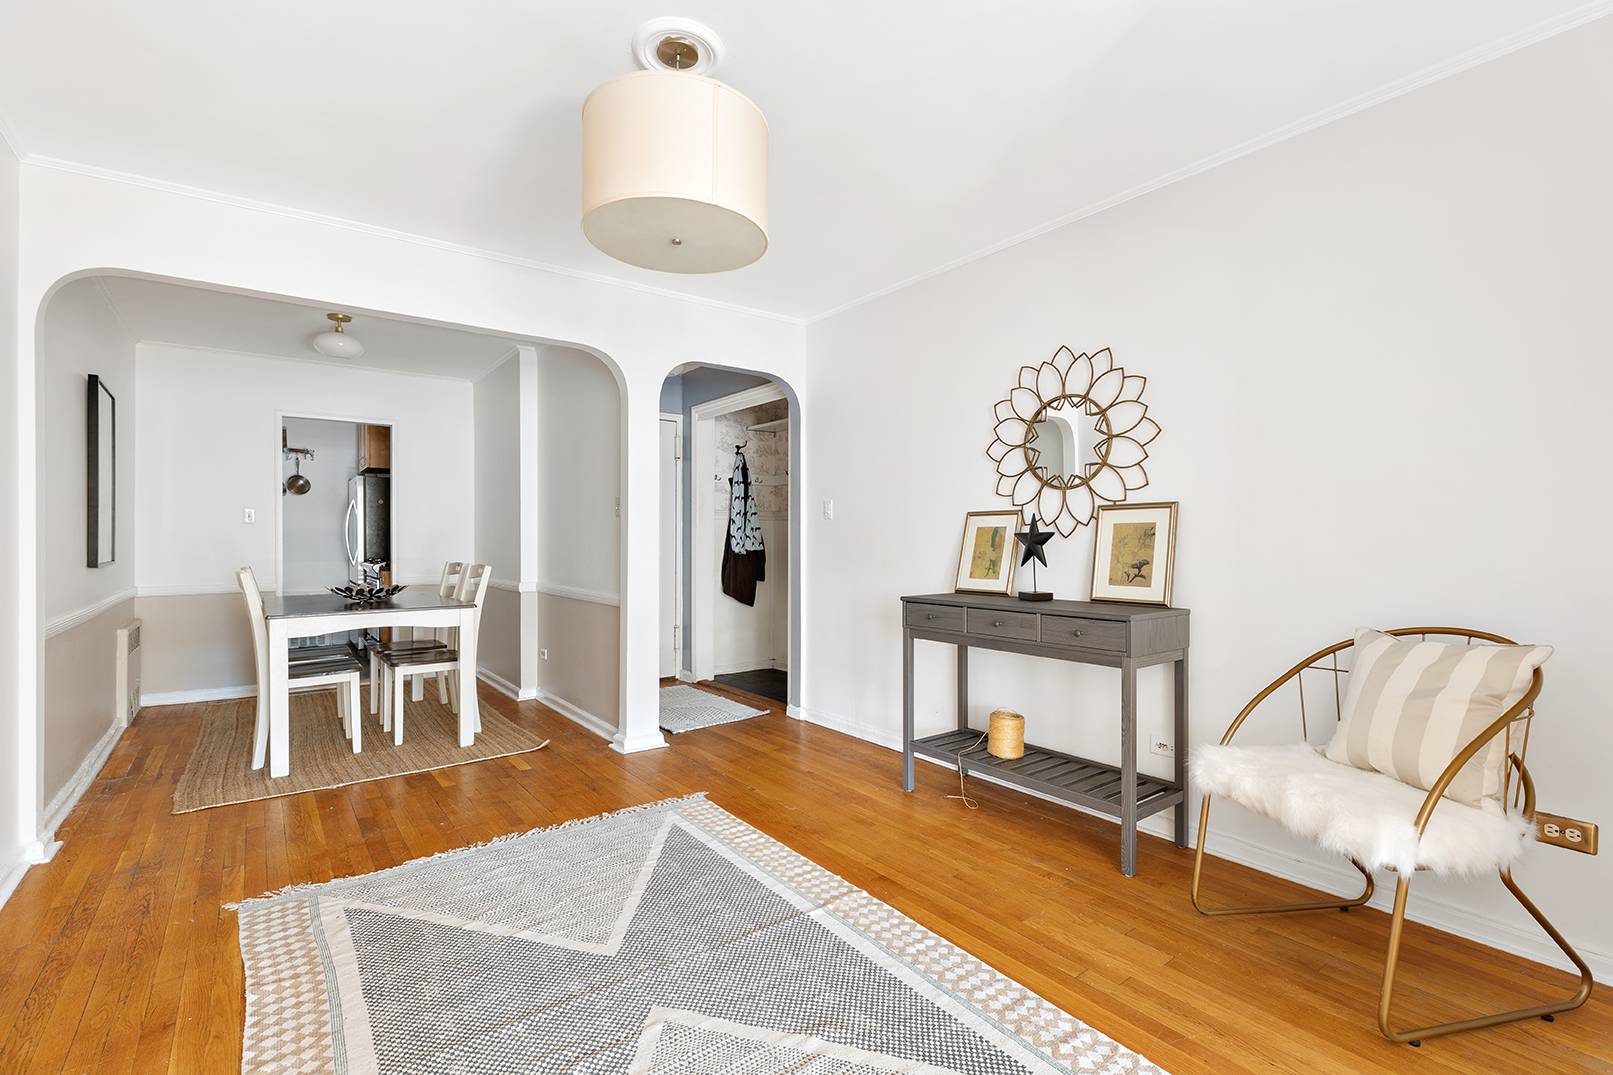 Spectacularly spacious and ideally located close to Prospect Park, near the intersection of Windsor Terrace and Kensington.